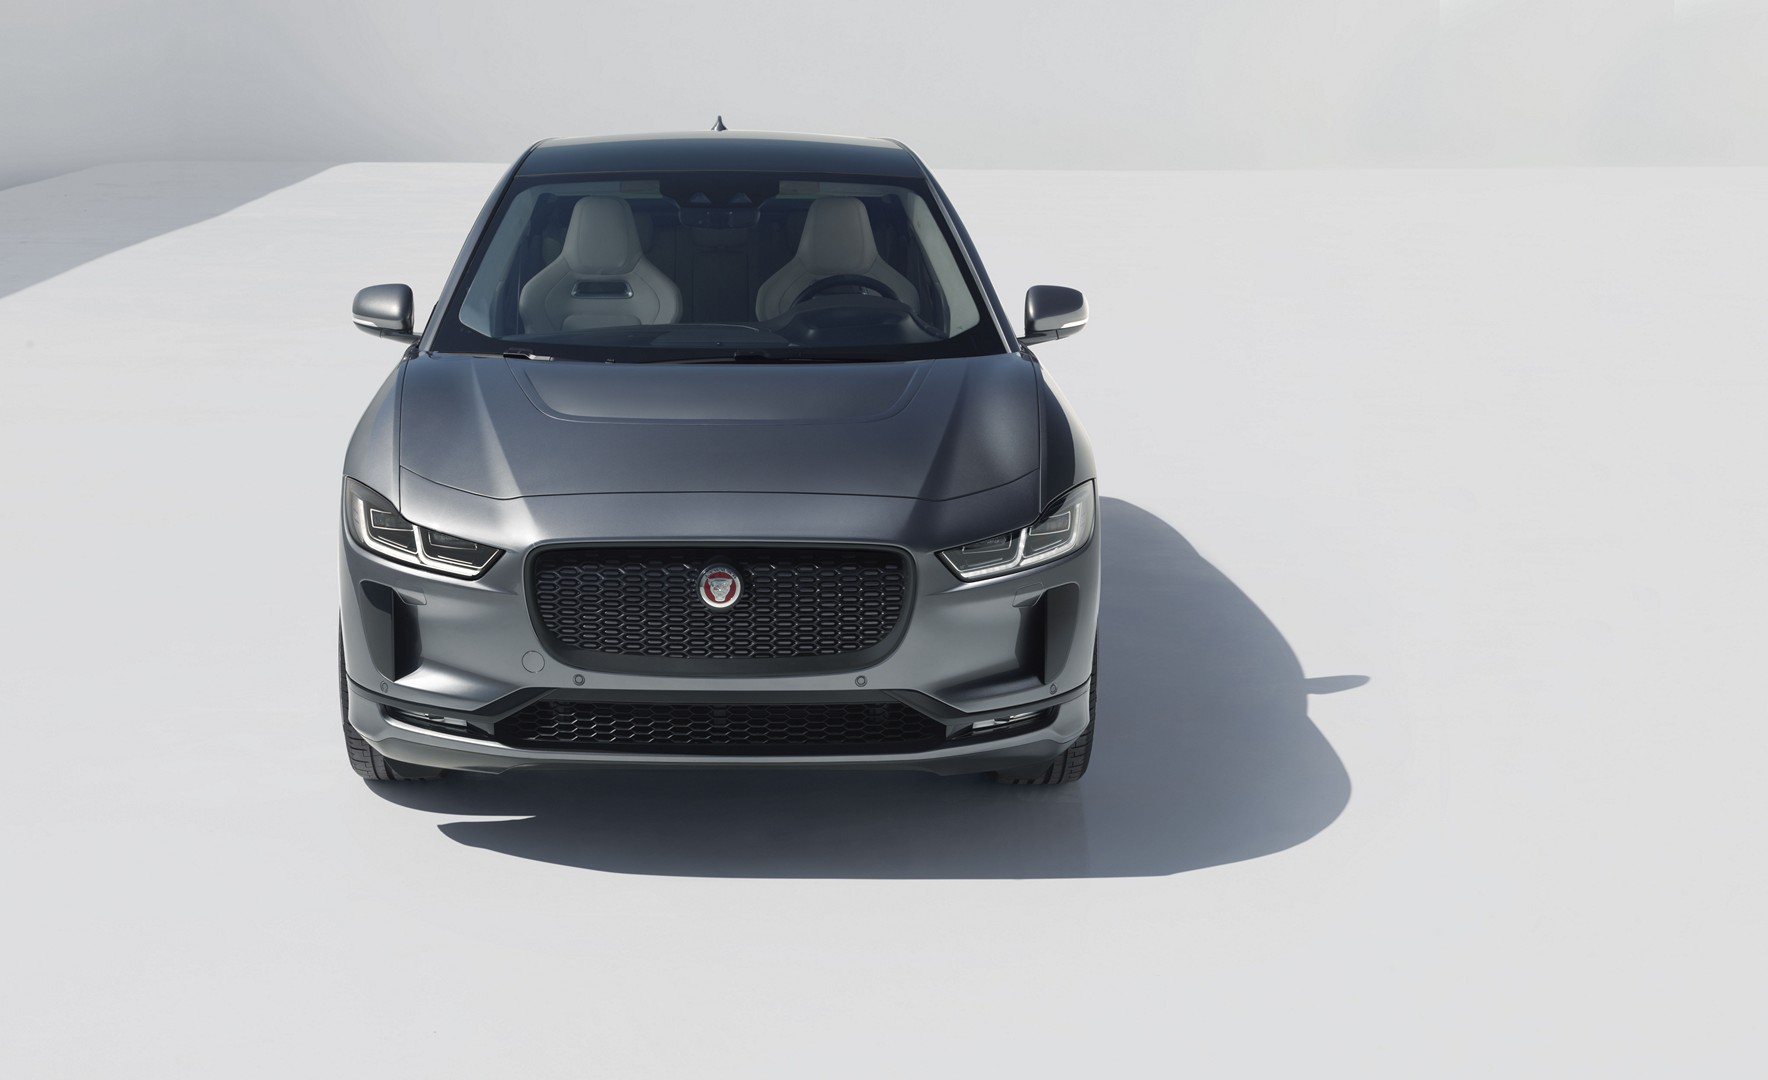 https://s1.cdn.autoevolution.com/images/news/gallery/2020-jaguar-i-pace-update-offers-234-miles-of-range-thanks-to-etrophy-know-how_8.jpg